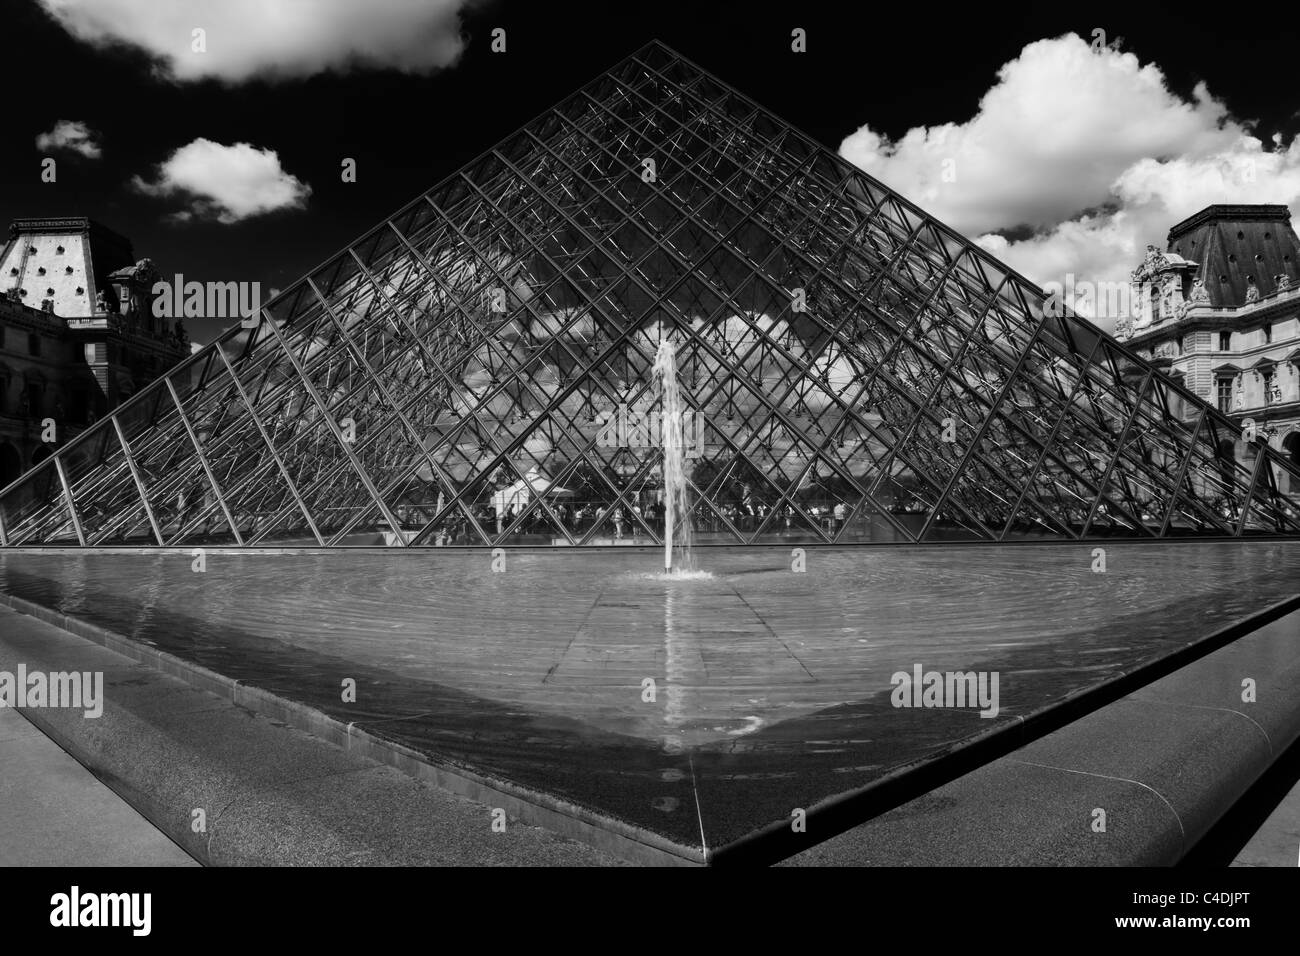 Creative black and white view of the Glass Pyramid and fountain entrance to the Louvre museum Paris France Stock Photo